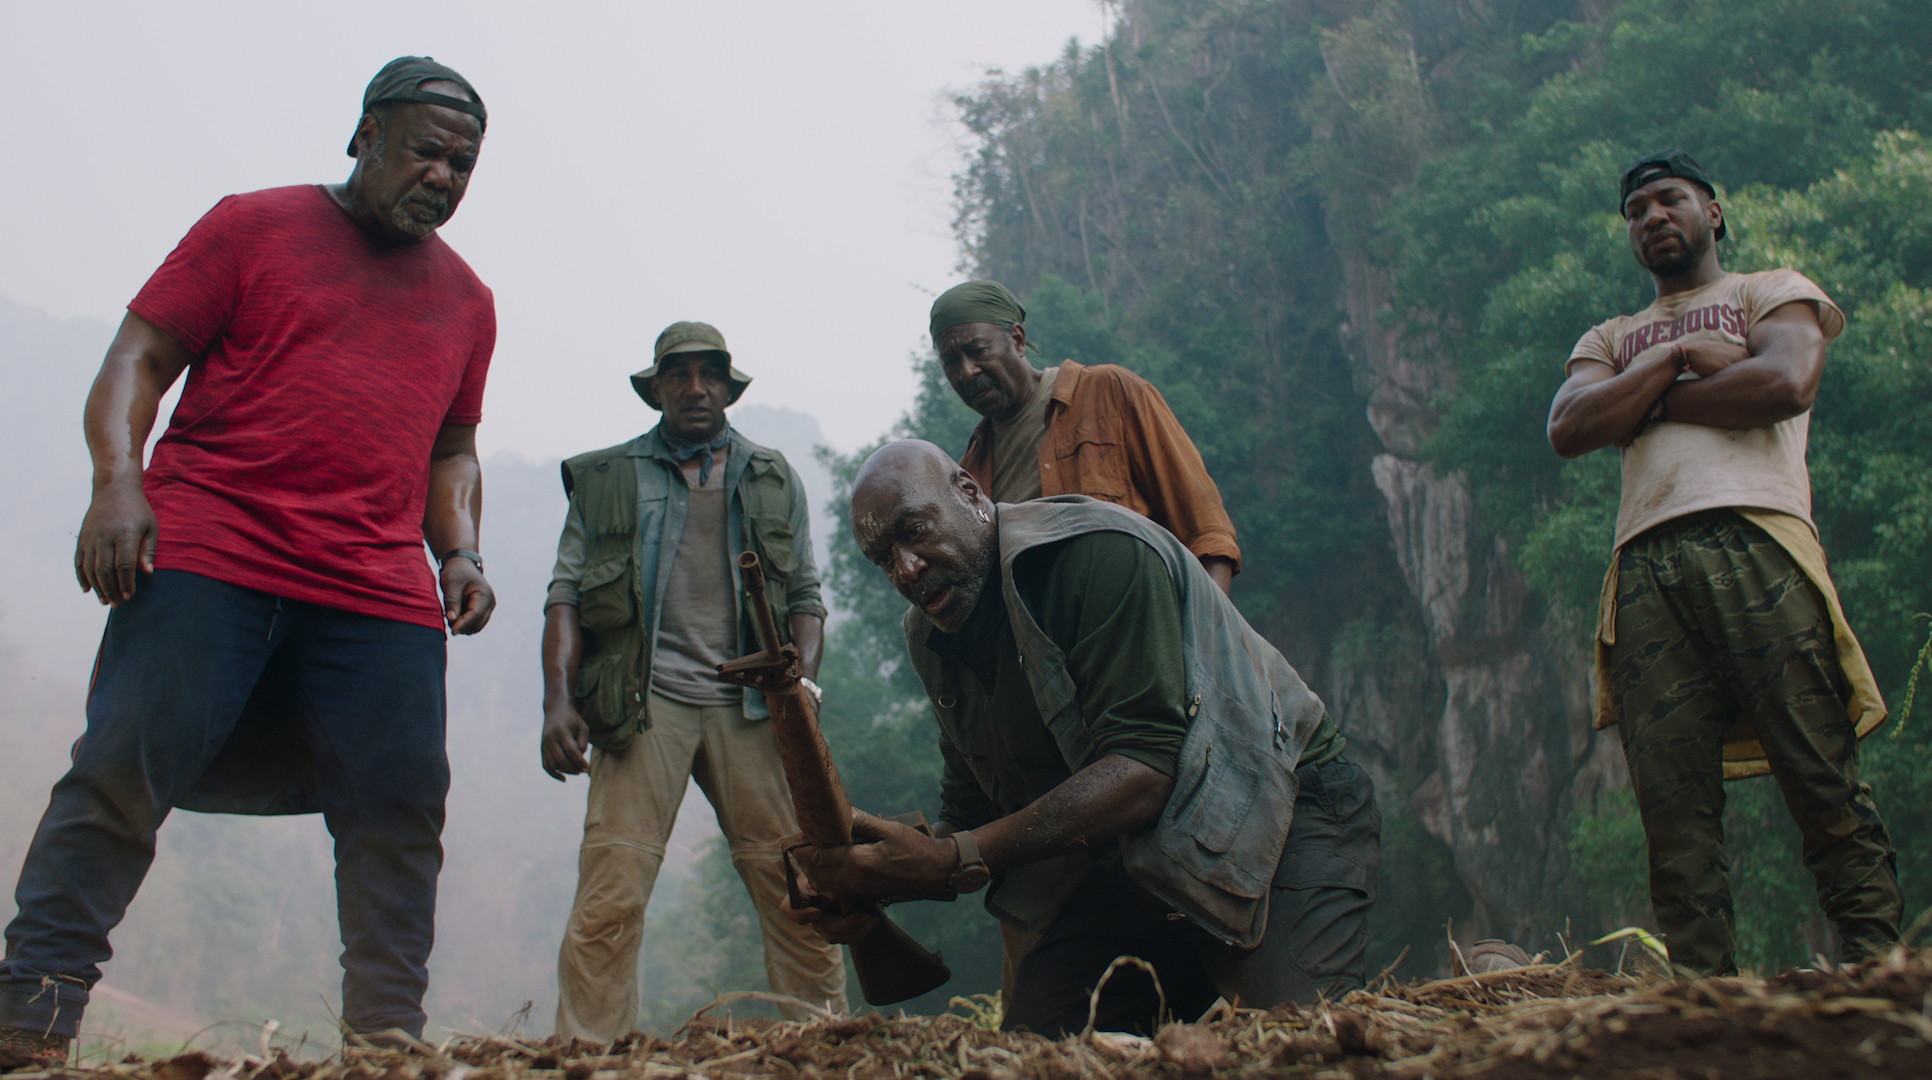 Isiah Whitlock Jr., Norm Lewis, Delroy Lindo, Clarke Peters, and Jonathan Majors in "Da 5 Bloods," in which four friends visit Vietnam to recover what they lost during the war.